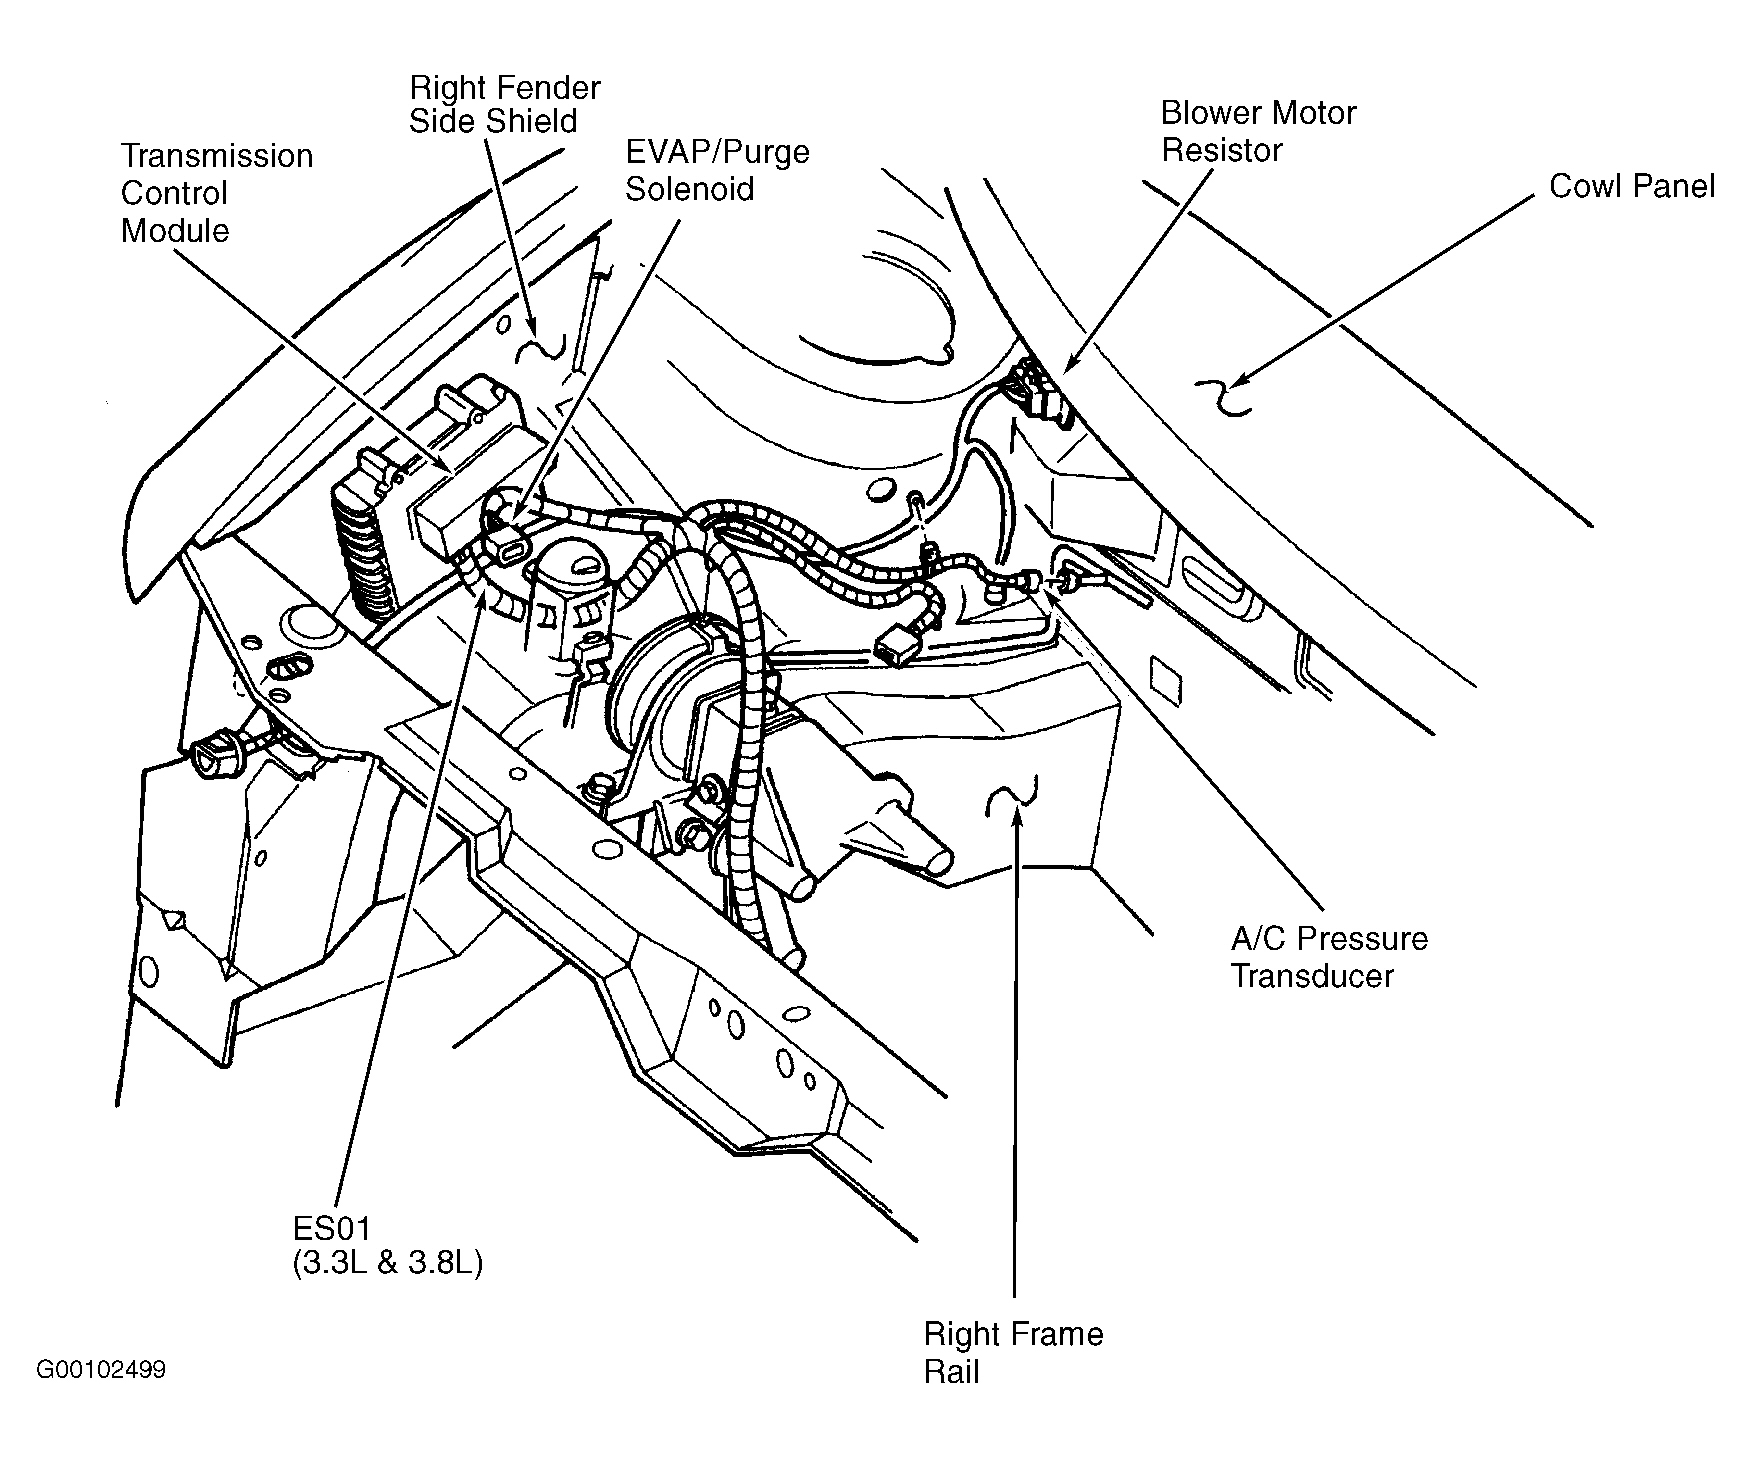 Dodge Grand Caravan SE 1996 - Component Locations -  Right Side Of Engine Compartment